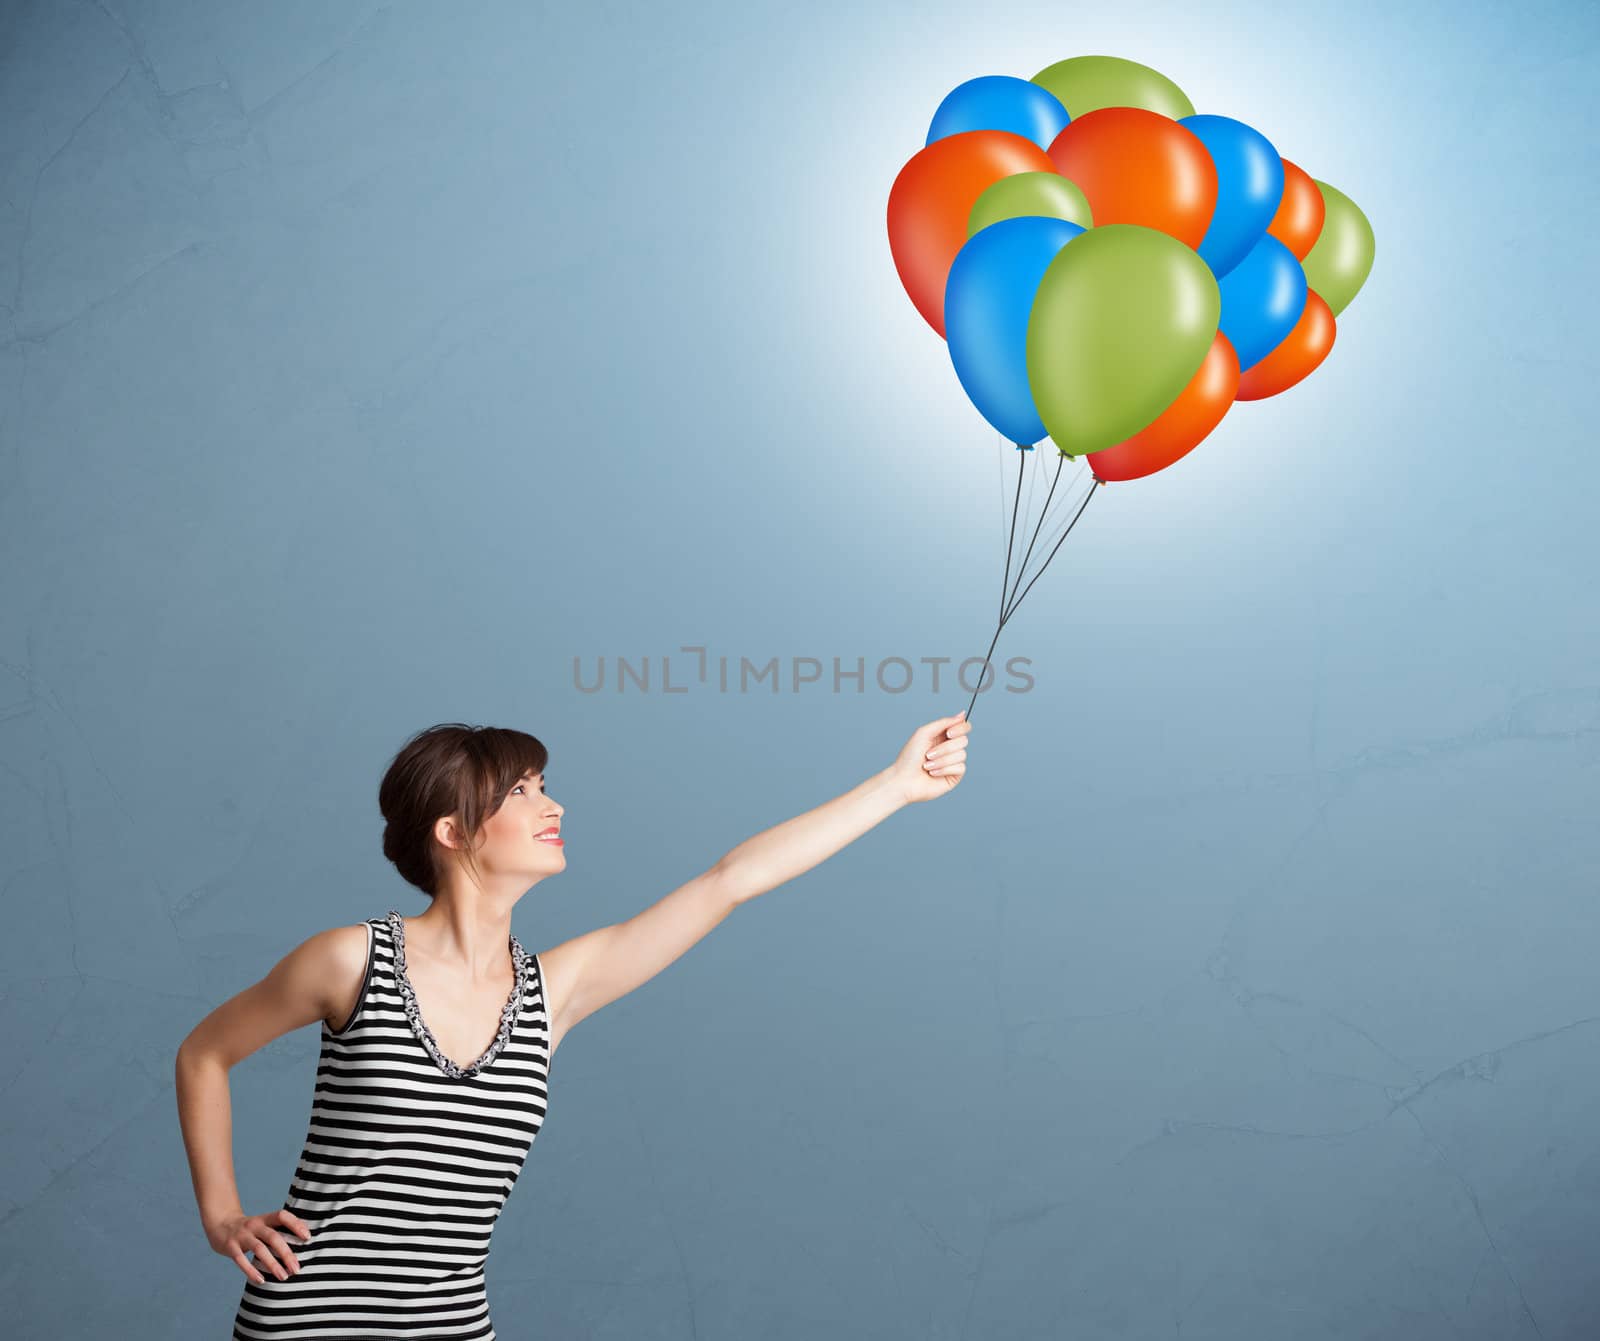 Pretty young woman holding colorful balloons